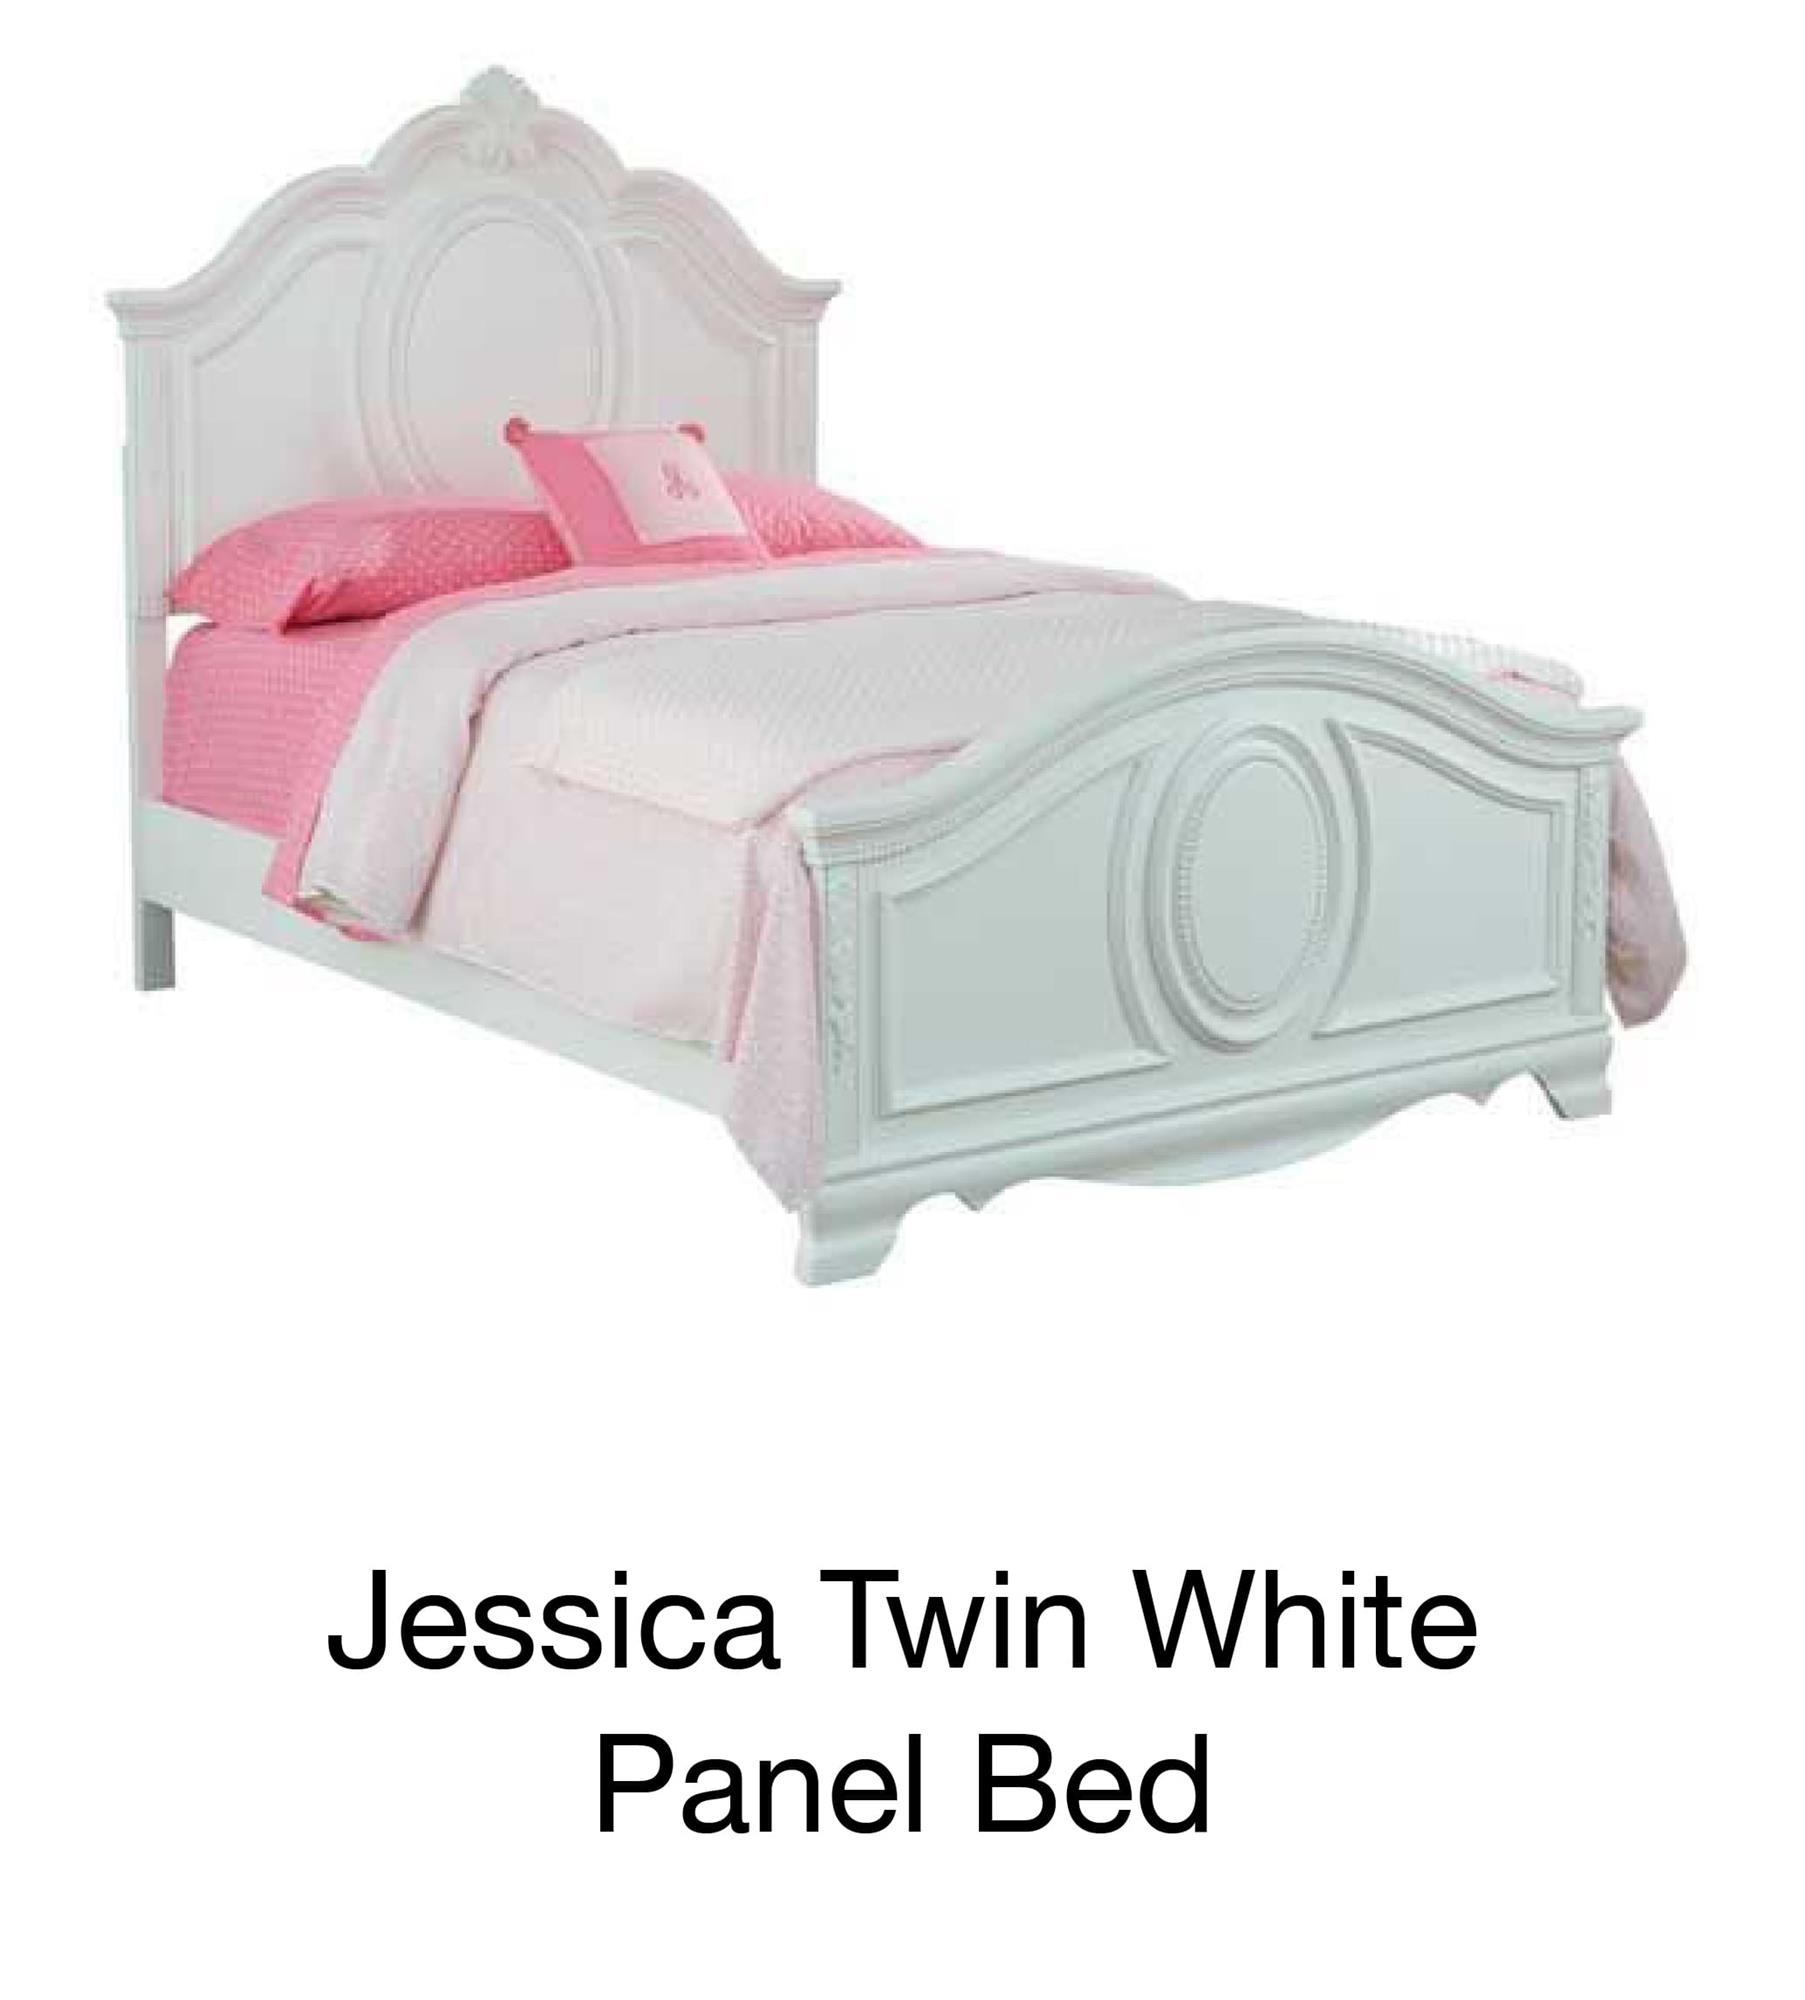 Jessica Twin White Panel Bed